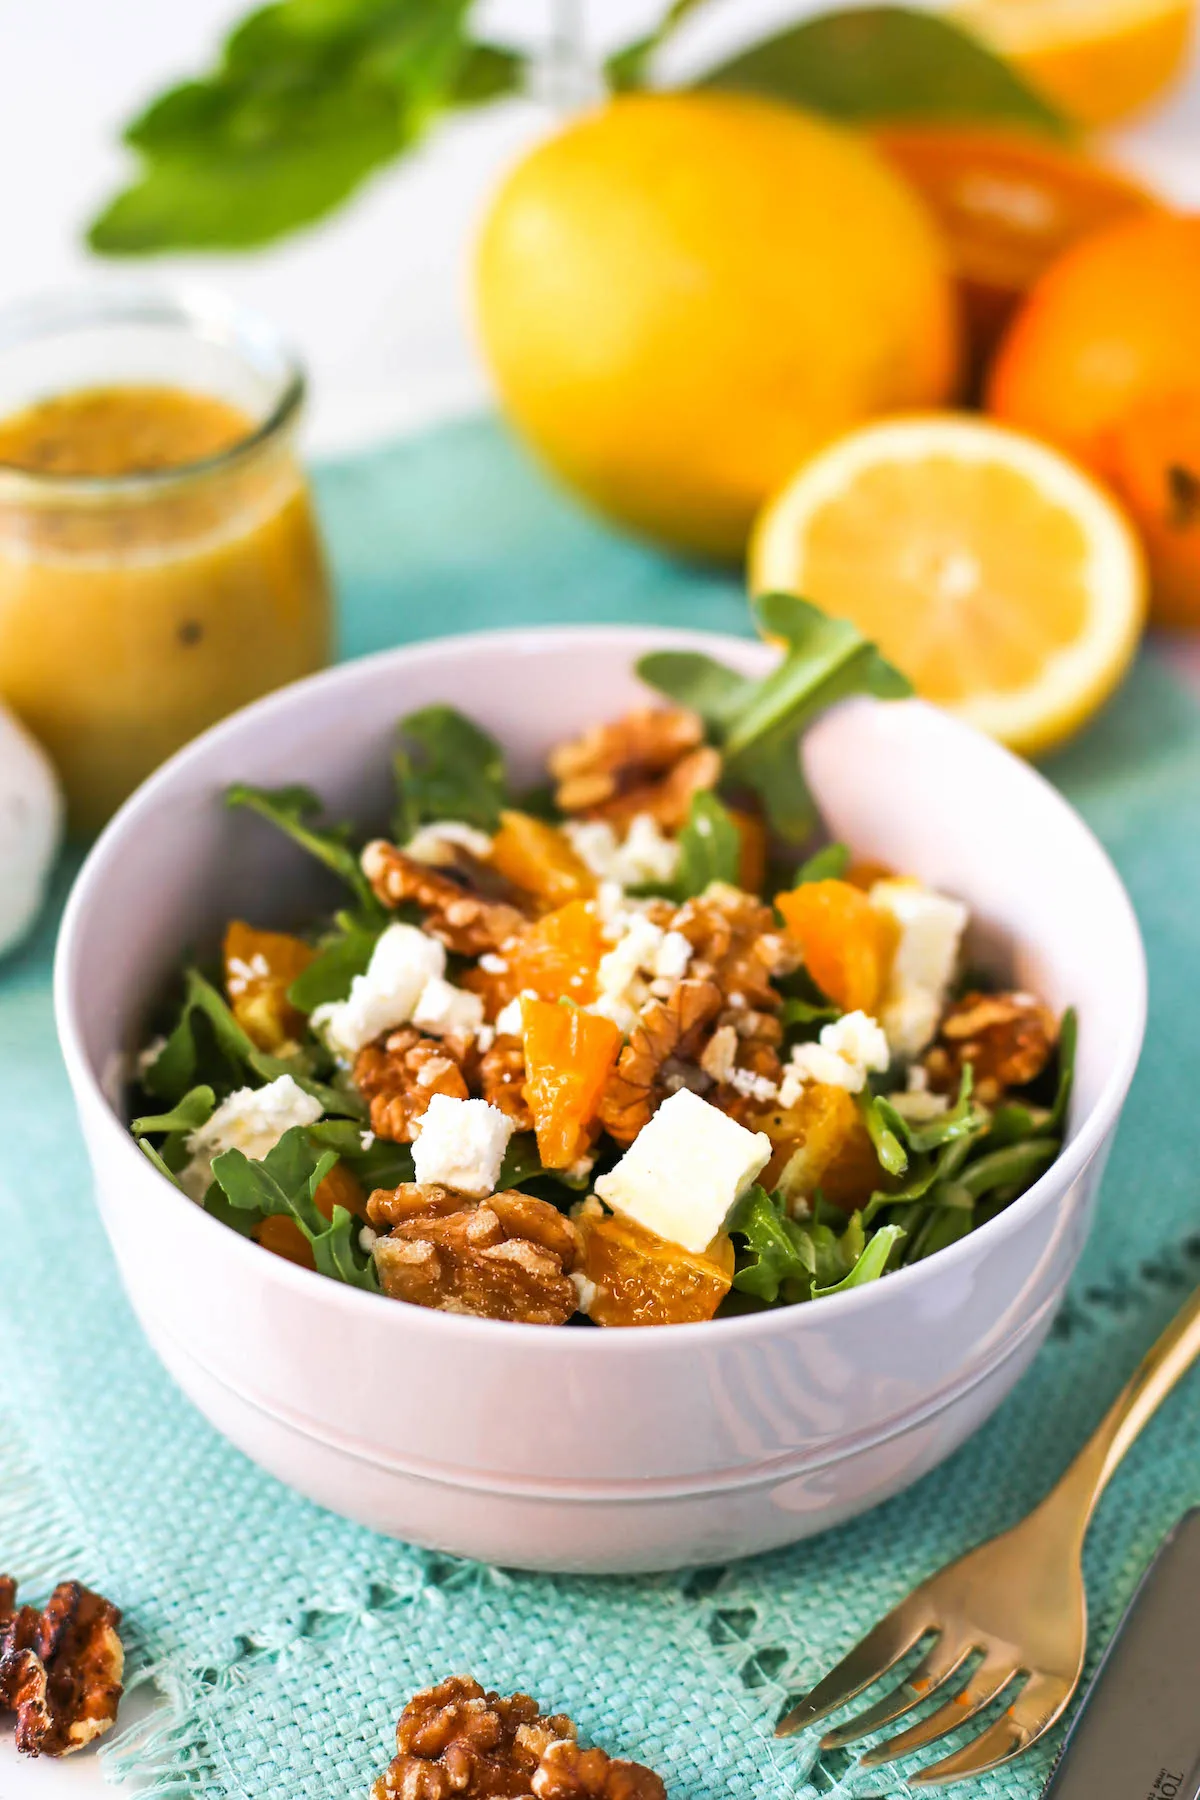 Orange and arugula salad in a pink bowl with walnuts and feta cheese atop a blue placemat with walnuts, gold flatware, sliced and whole lemons and oranges, a head of garlic, and a jar of lemon vinaigrette around it